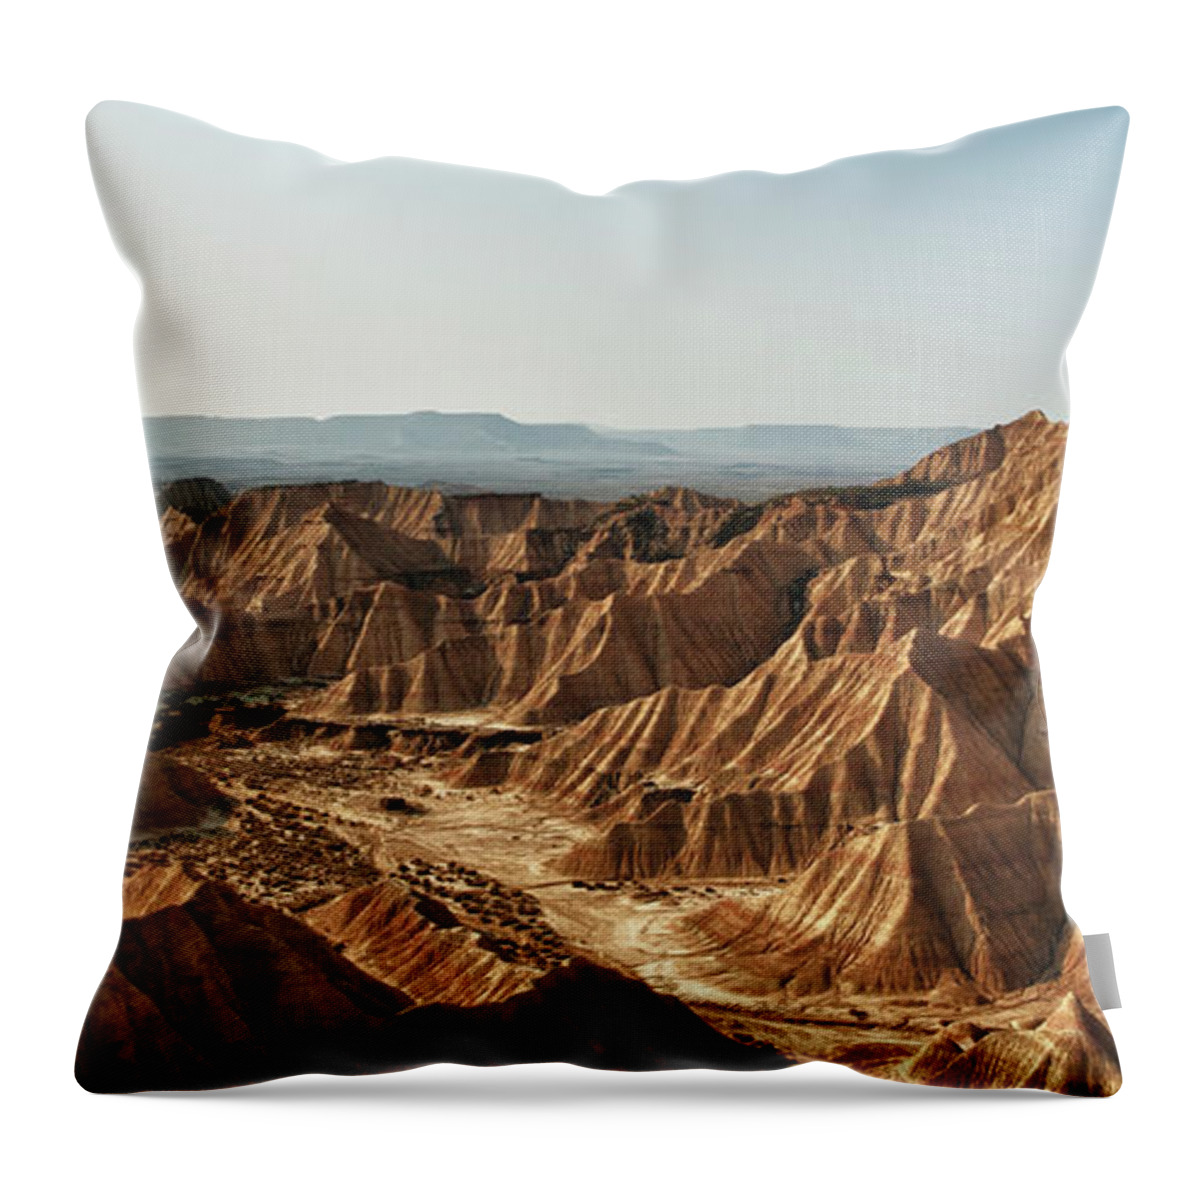 Tranquility Throw Pillow featuring the photograph Natural Park Bardenas Of Navarra by Izeta